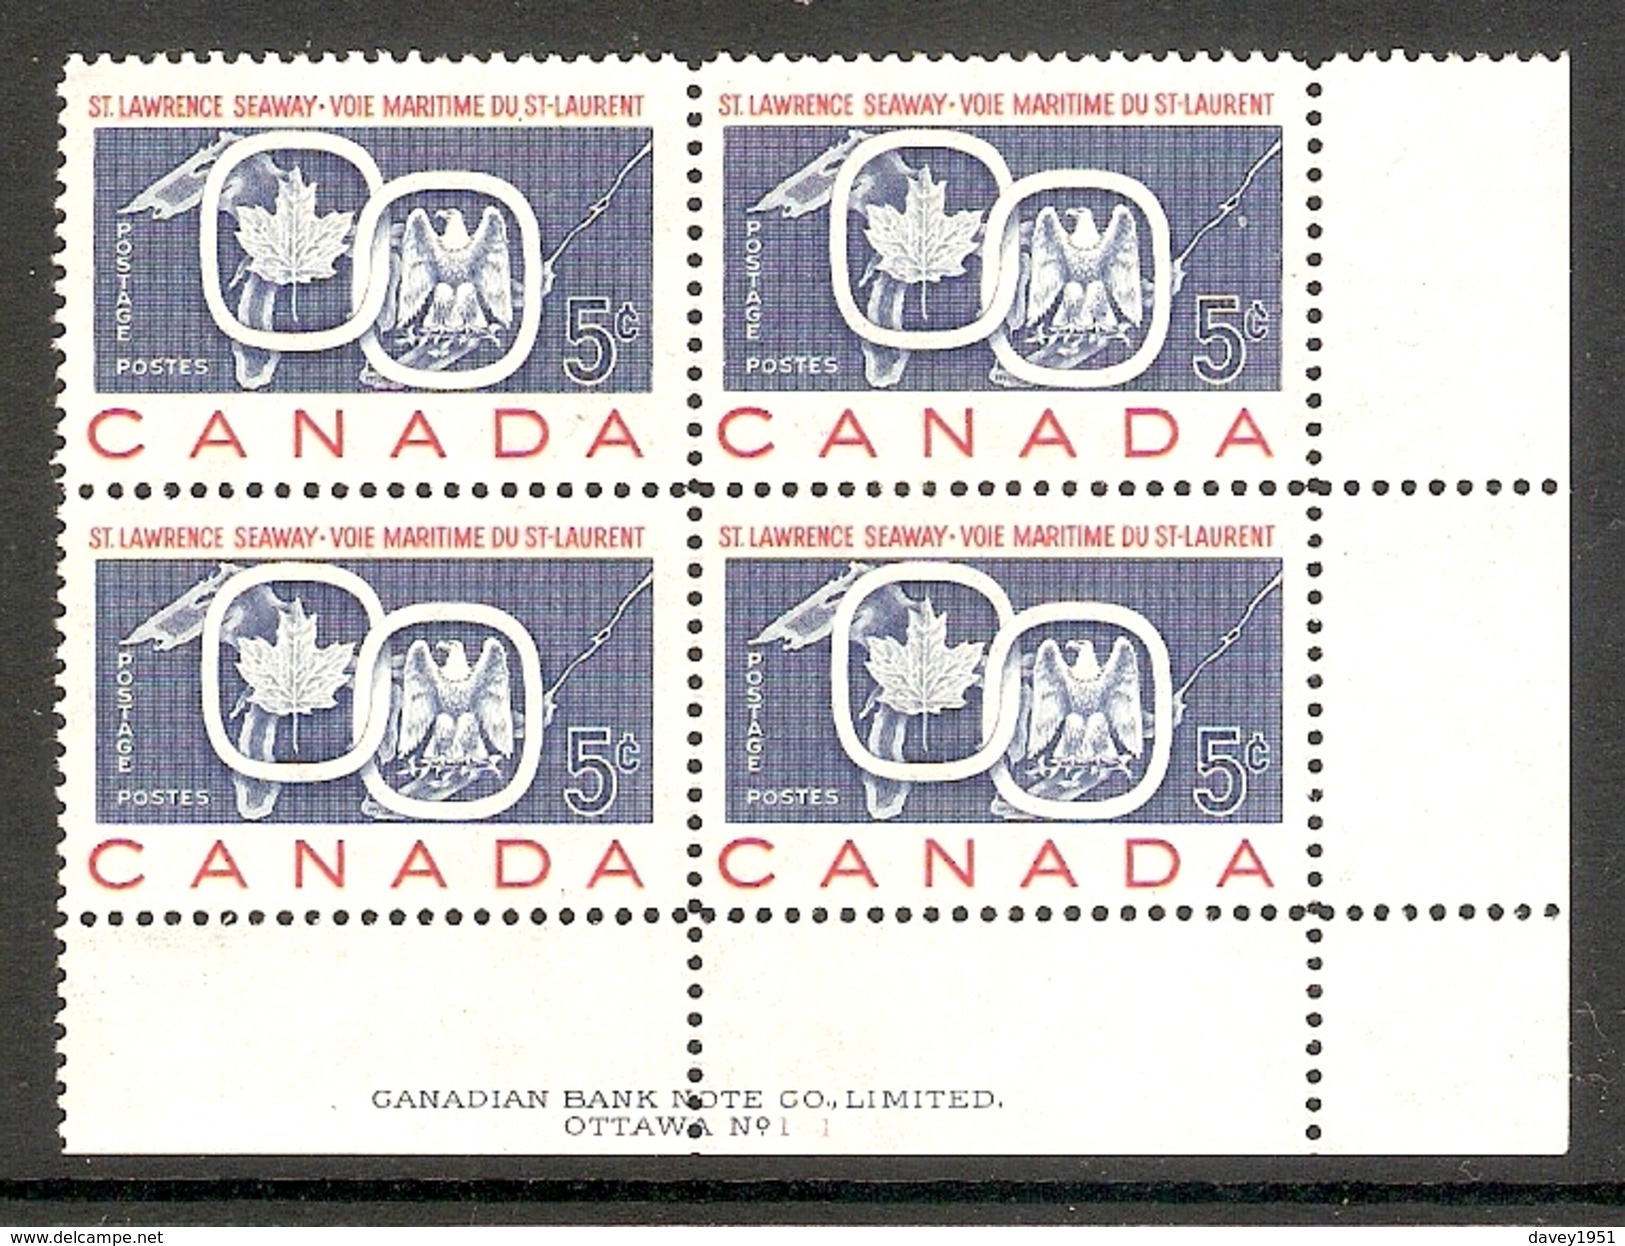 001216 Canada 1959 St Lawrence 5c Plate 1 Block LR MNH - Plate Number & Inscriptions